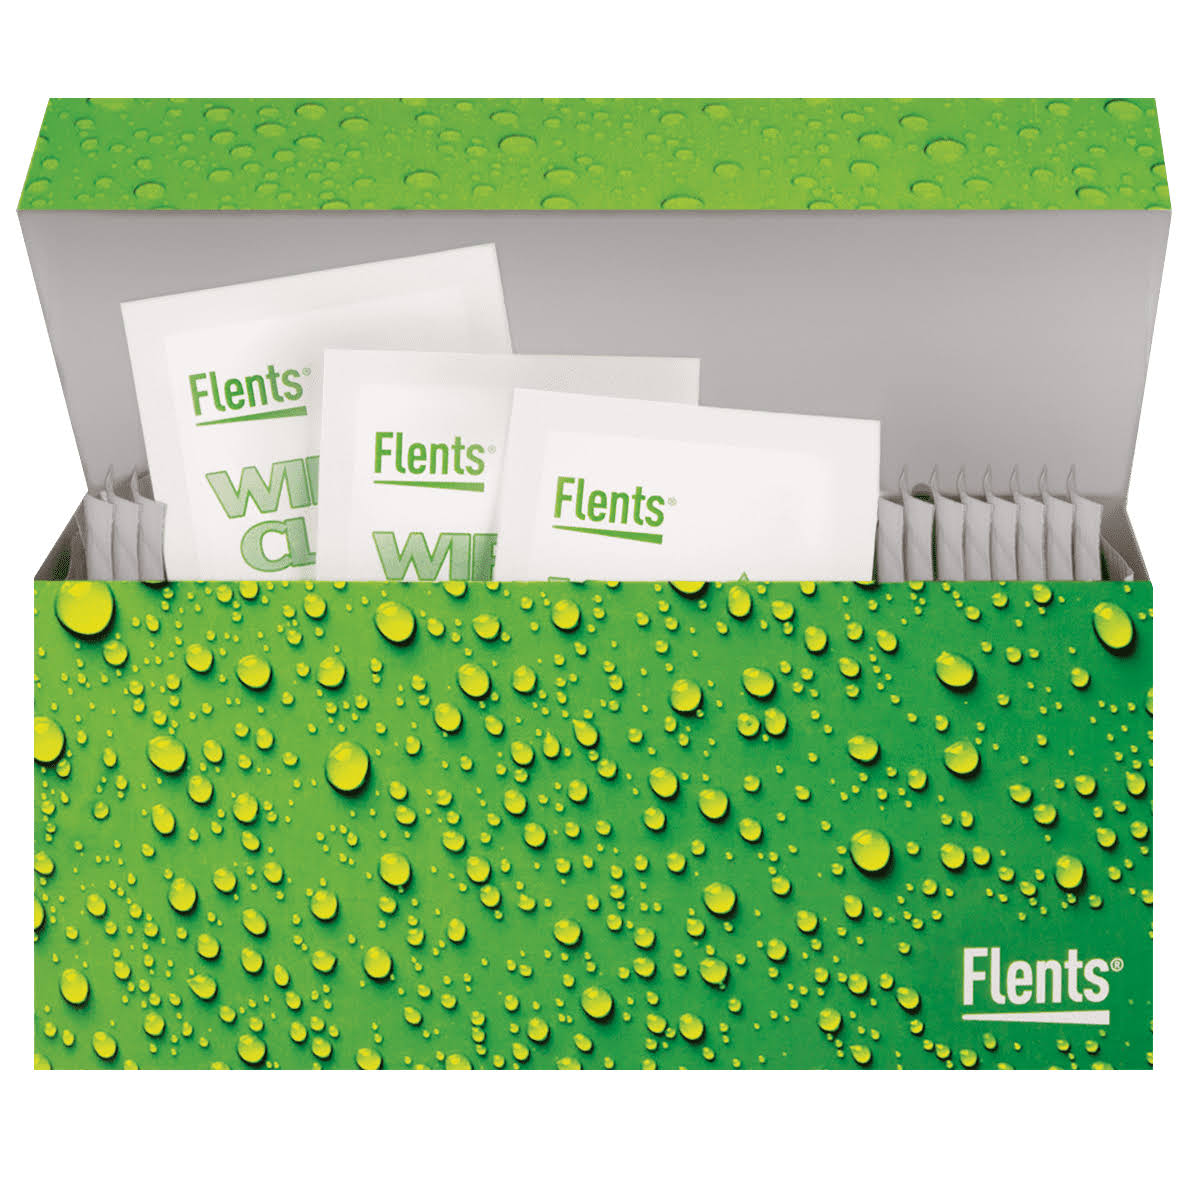 Flents Wipe 'N Clear Lens Cleaning Wipes - 25ct, in Decorative Boxes